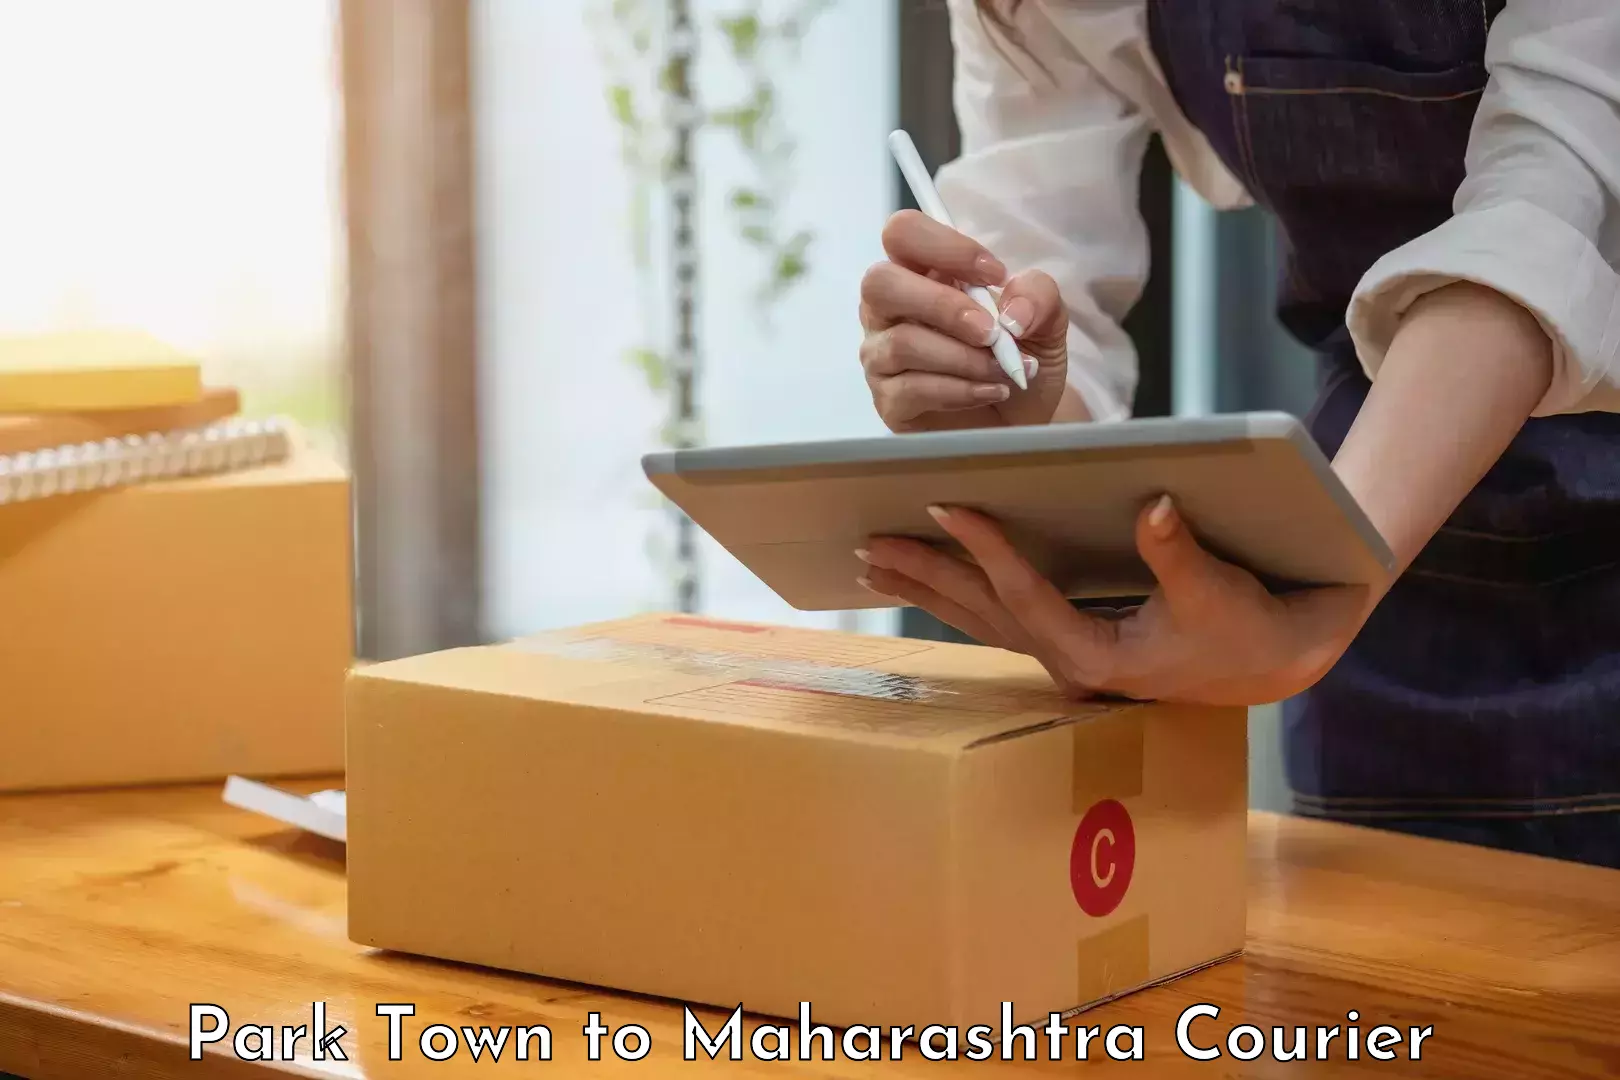 Efficient package consolidation in Park Town to Maharashtra